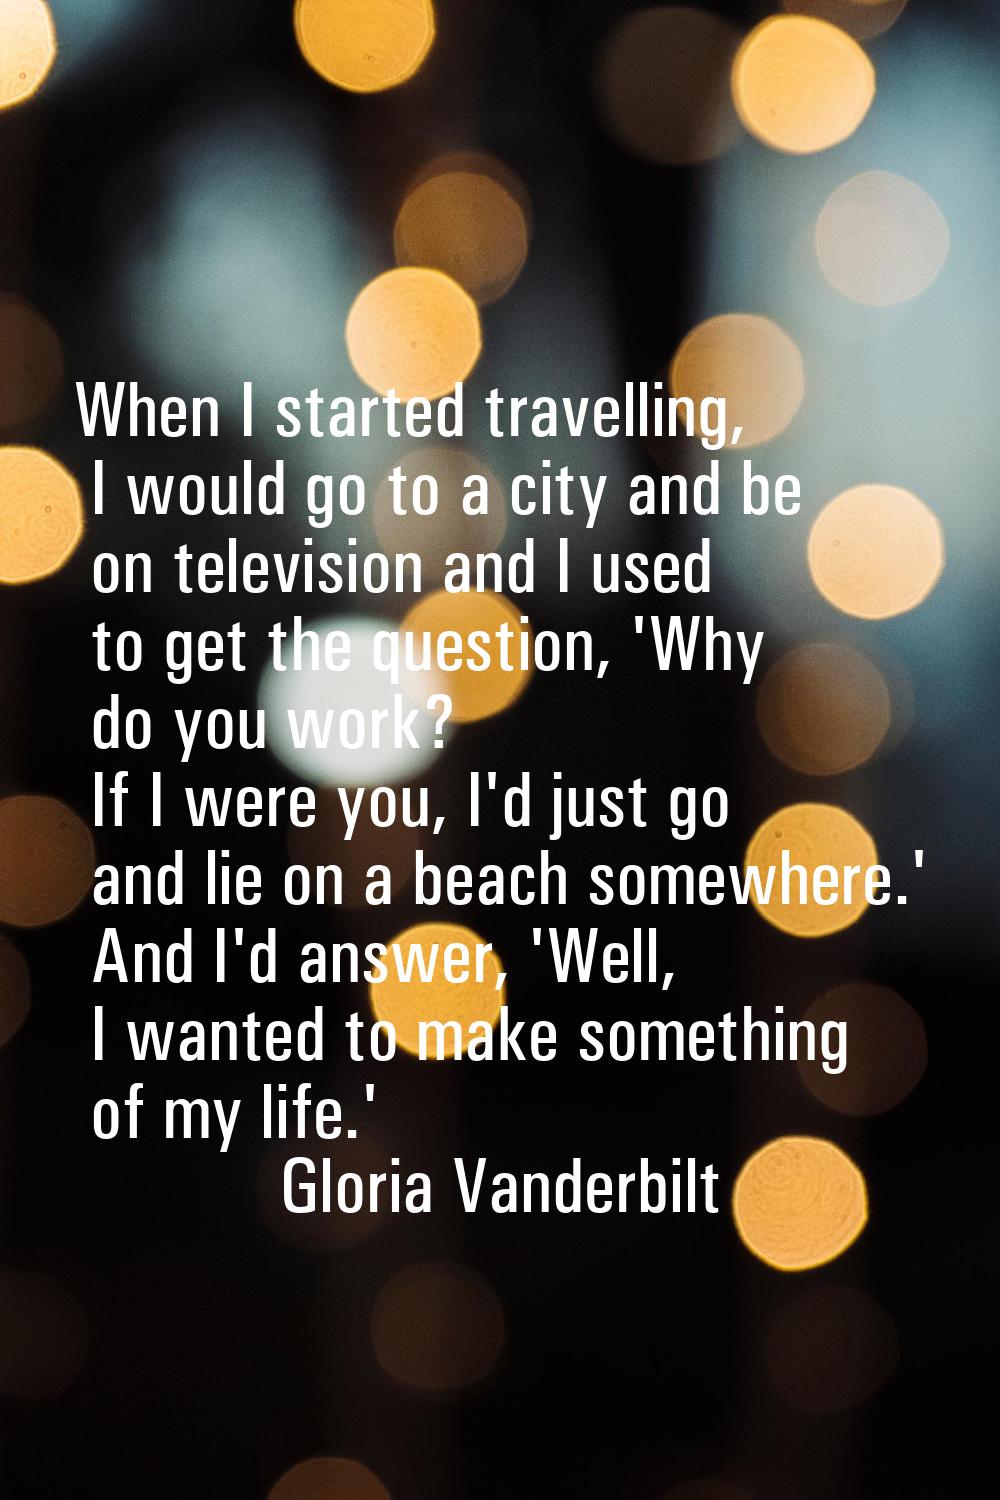 When I started travelling, I would go to a city and be on television and I used to get the question